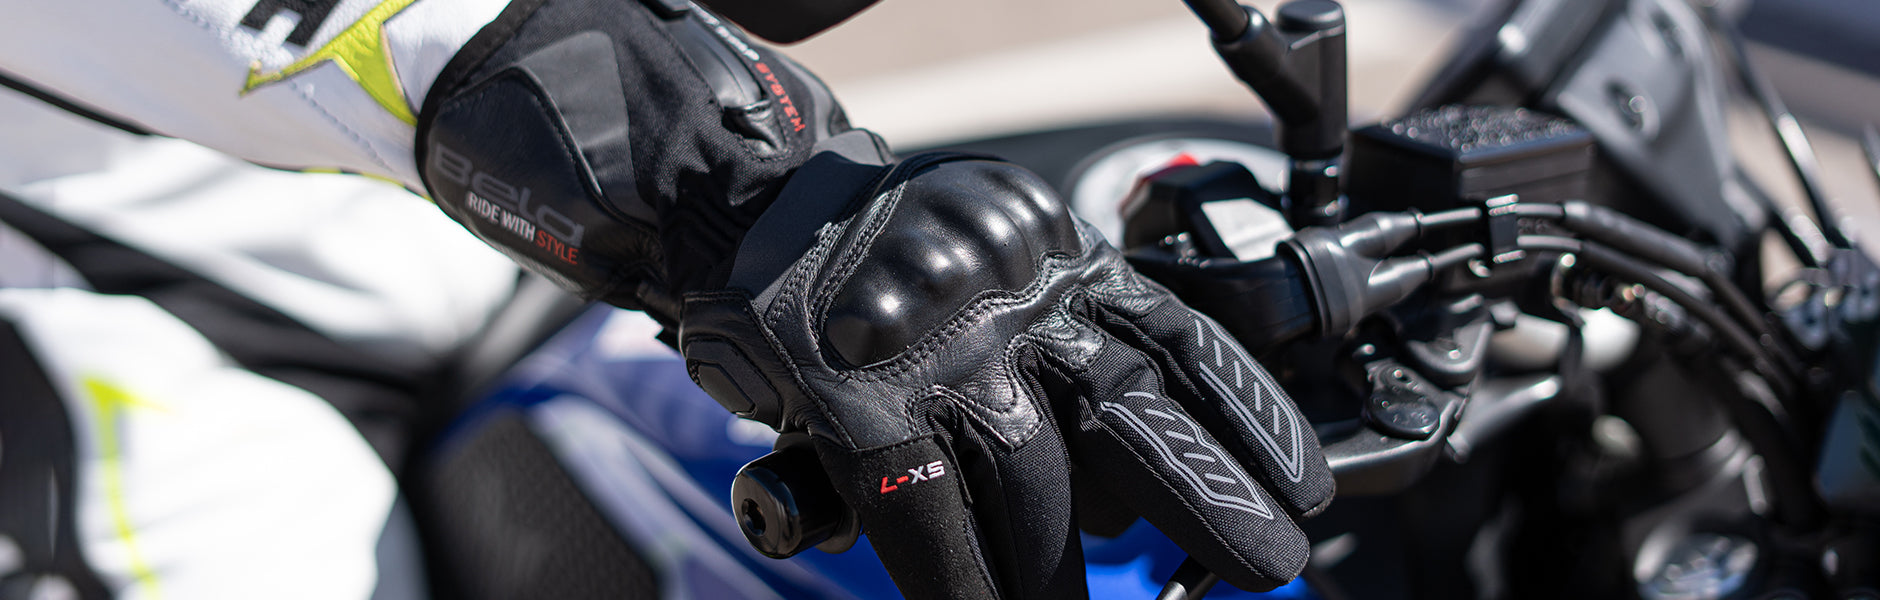 Winter and 4 season motorcycle glove at yamoto protect your hand at slippery road 